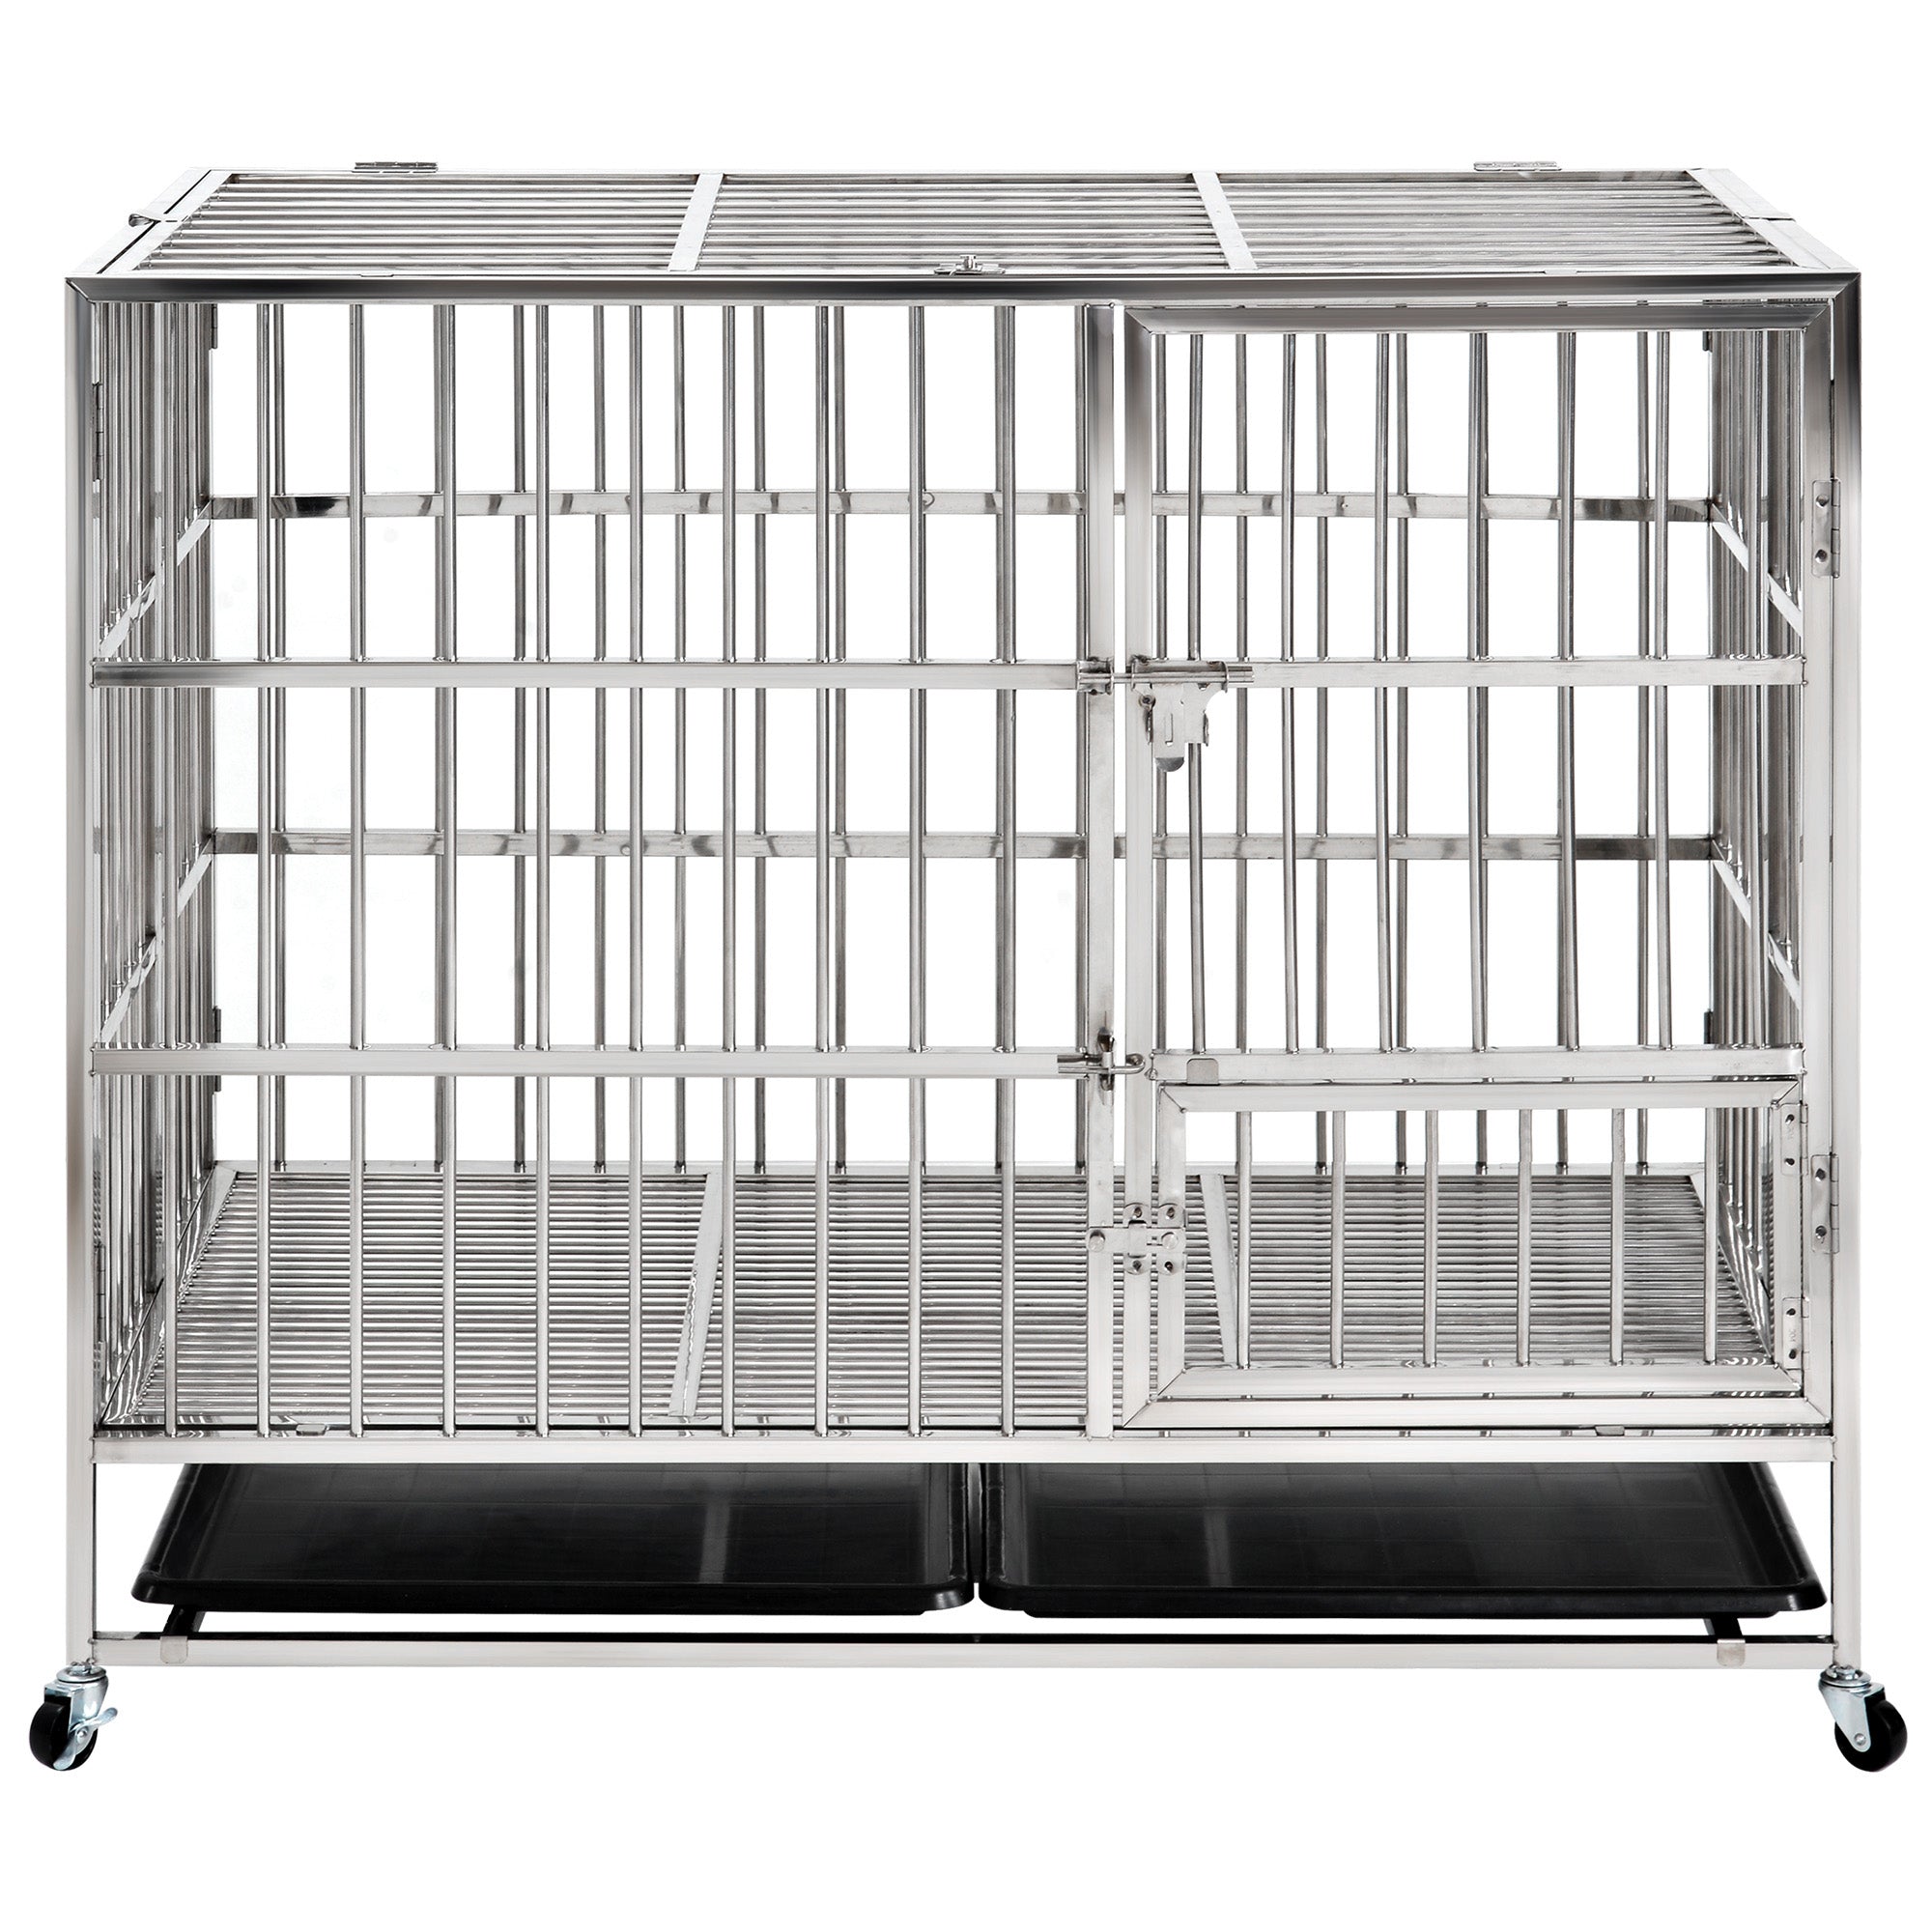 Stainless Steel Dog Crate Cage Kennel Easy Folding Pre-assembly No Screw No Tool Needed for Large Dogs 45 inch 115*76*79cm